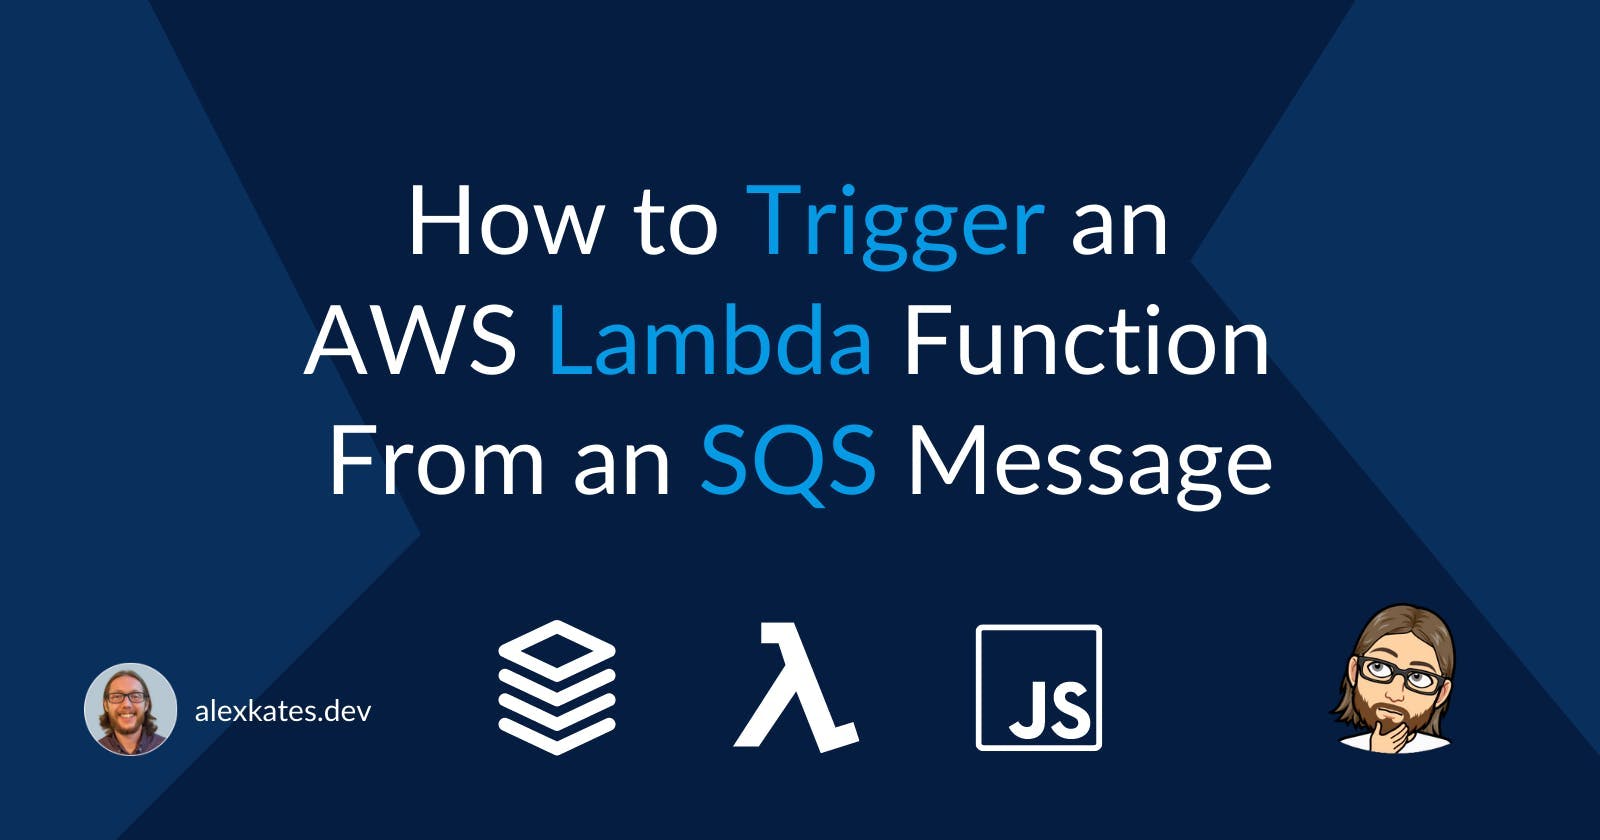 How to Trigger an AWS Lambda Function From an SQS Message